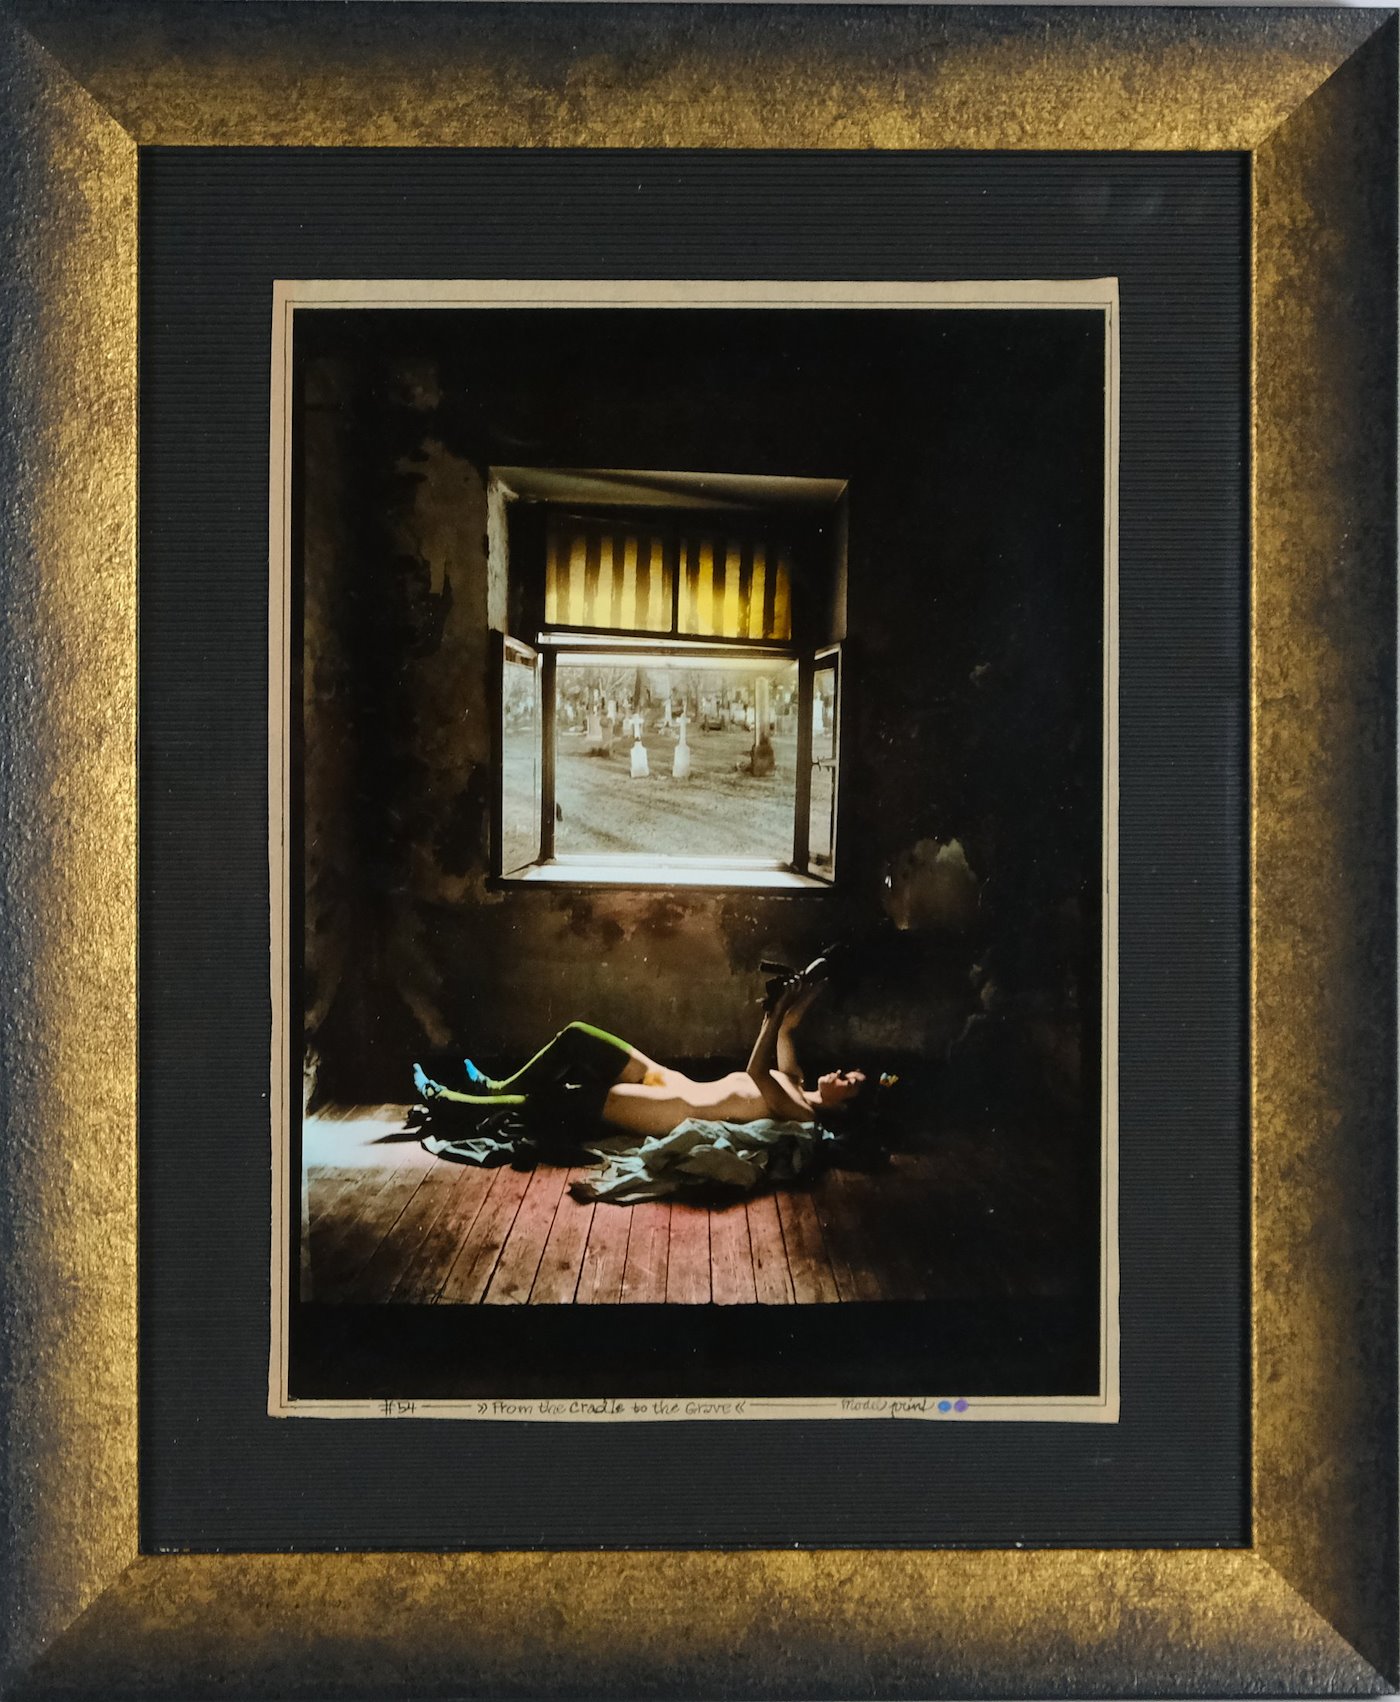 Jan Saudek - From the cradle to the Grave!